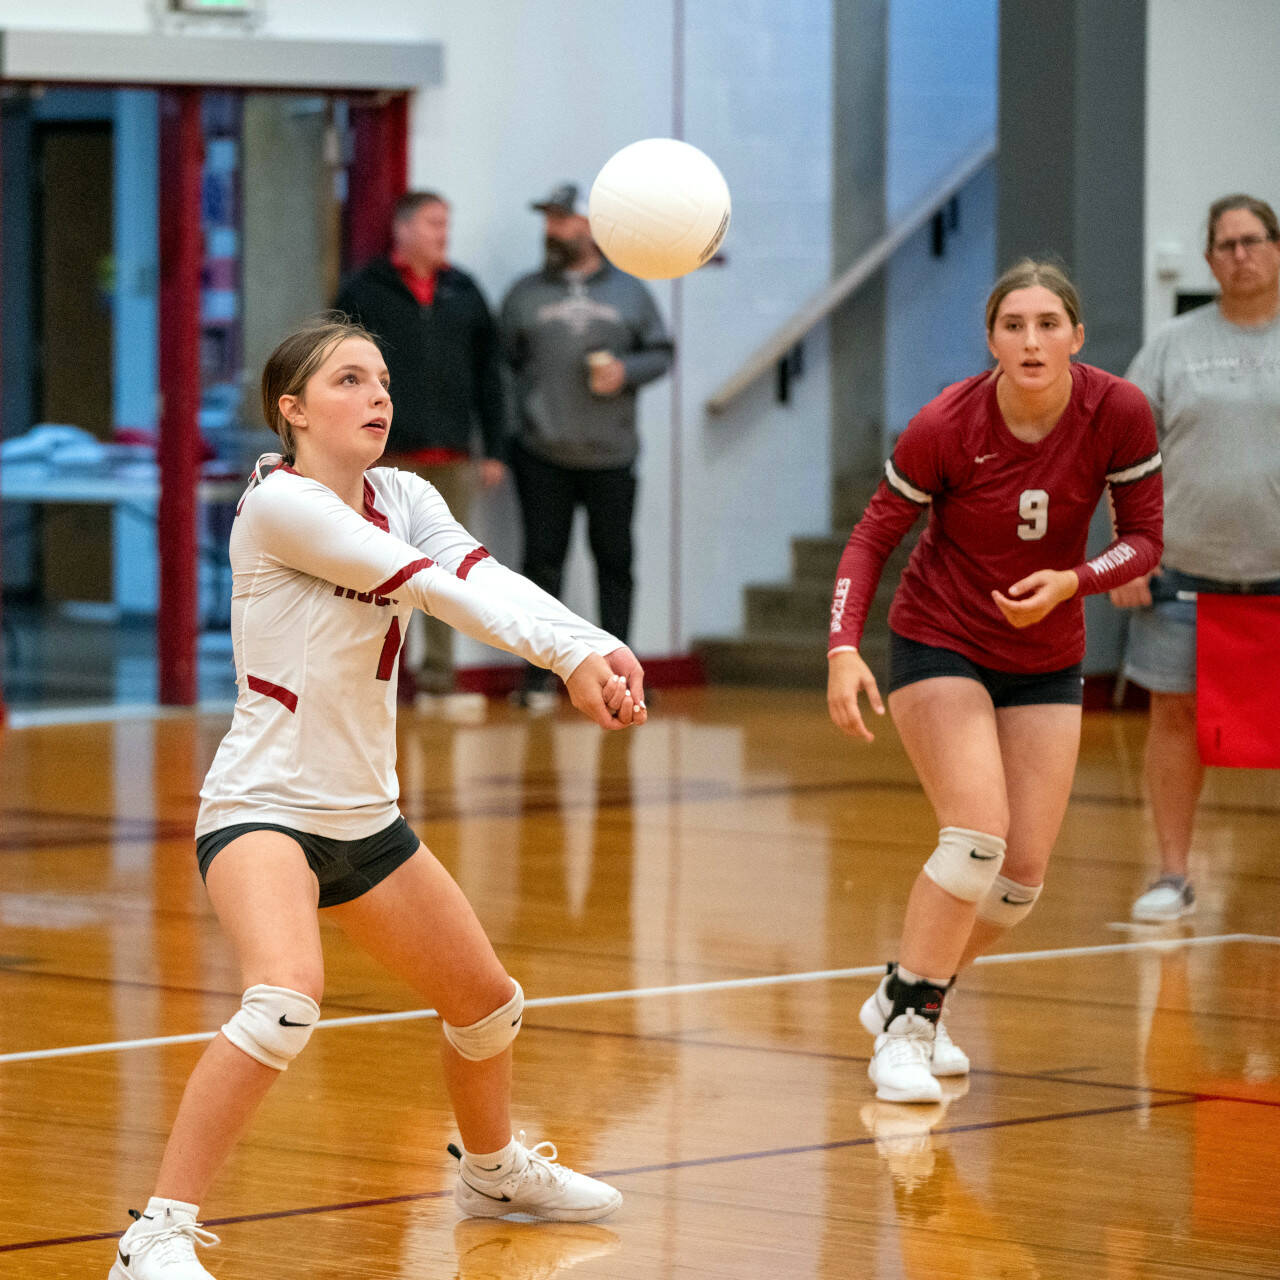 PHOTO BY FOREST WORGUM Hoquiam’s Lexi LaBounty, left, receives a serve during a straight-set victory over Elma on Tuesday in Hoquiam.